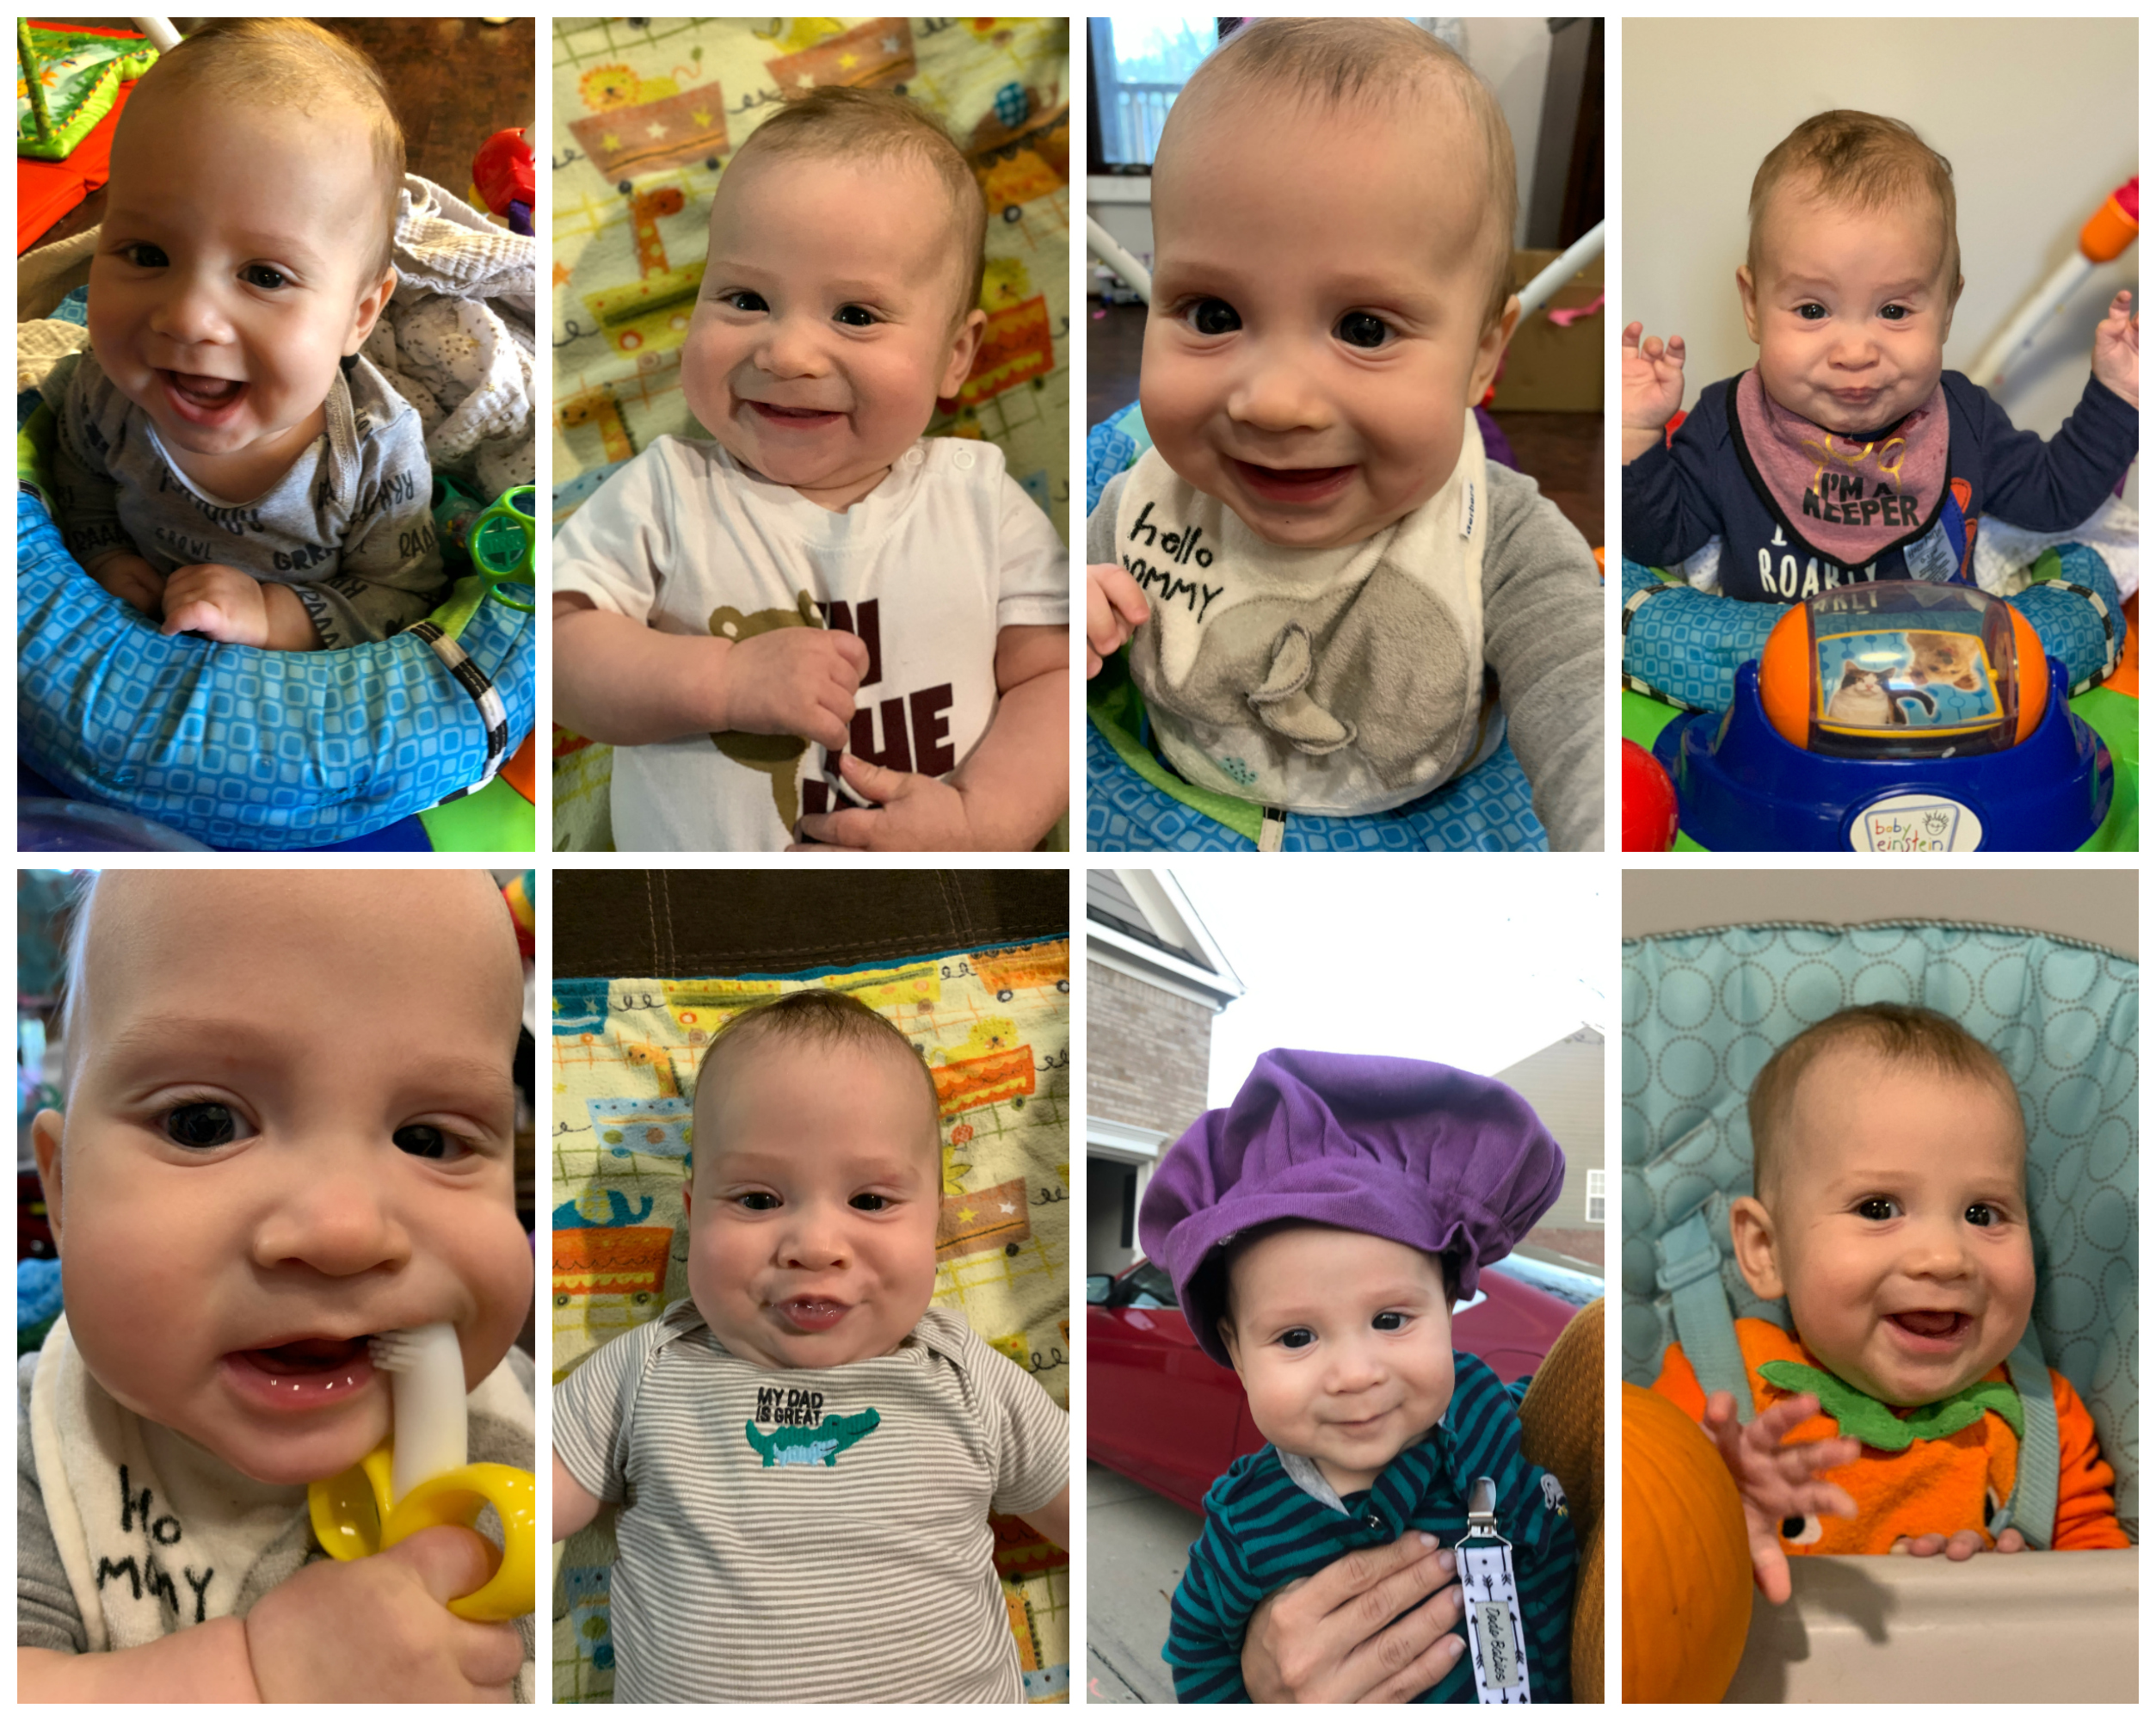 Brody-5months-faces